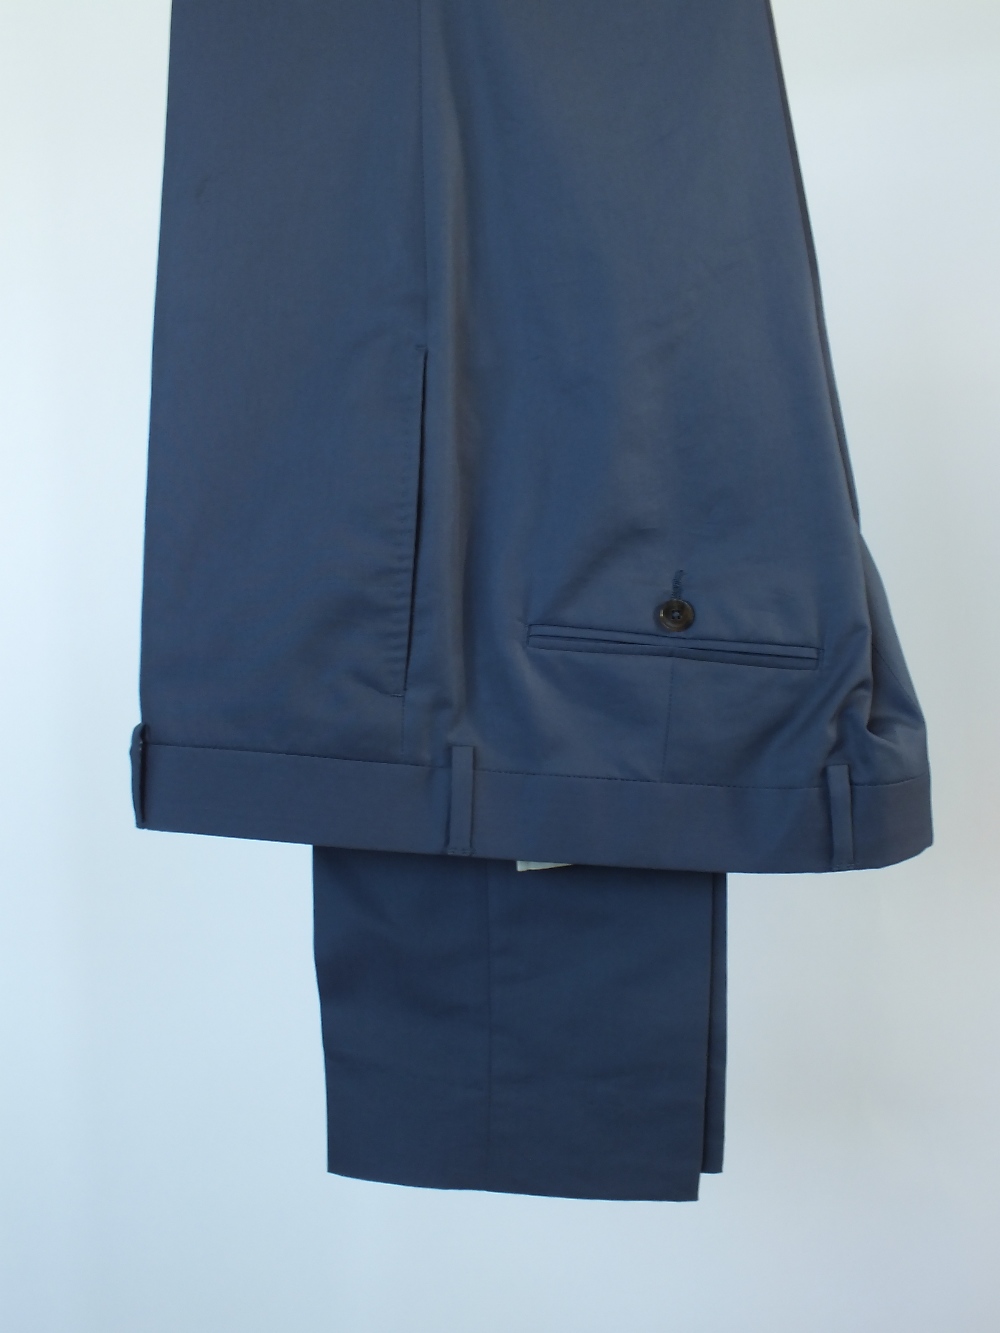 A Gucci suit, mid blue, lined in black, Italian size 52R, 65% cotton, 35% silk, flat front to - Image 6 of 6